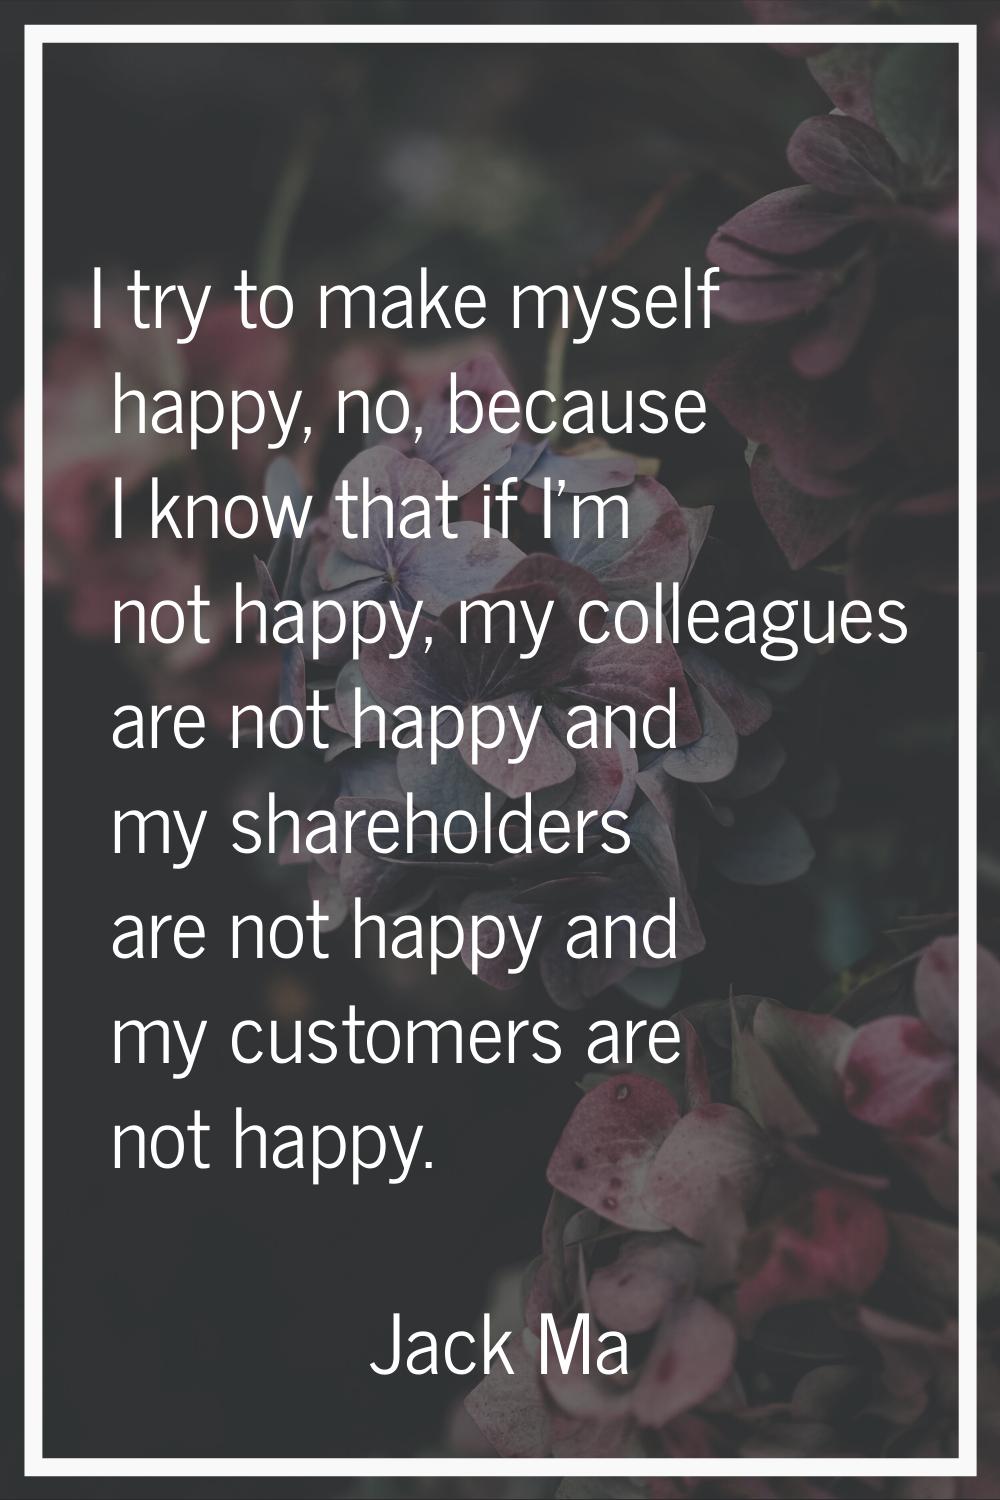 I try to make myself happy, no, because I know that if I'm not happy, my colleagues are not happy a